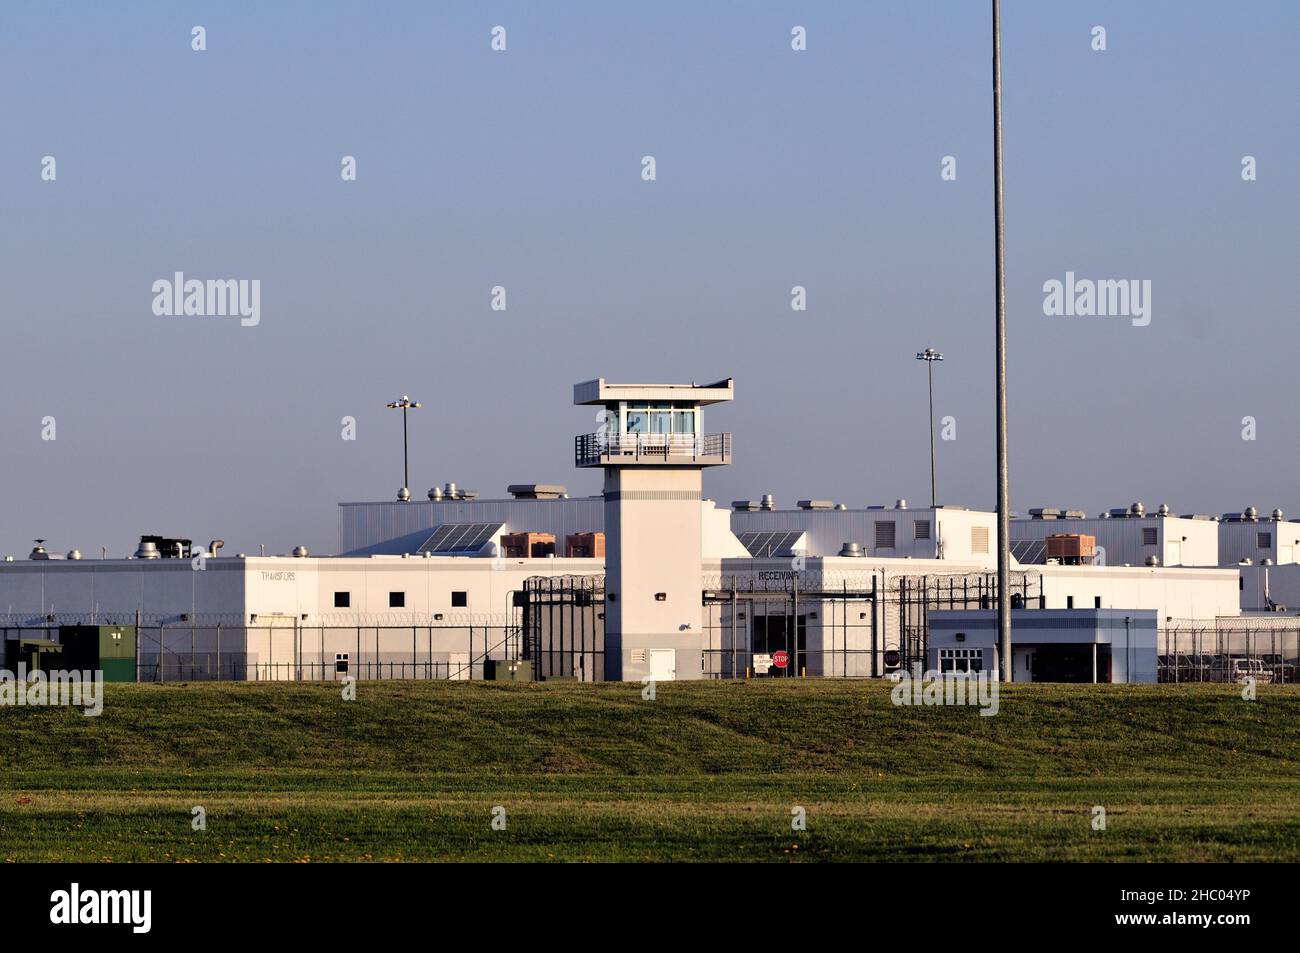 Crest Hill, Illinois, USA. Stateville Correctional Institution, a maximum security prison southwest of Chicago. The prison opened in 1925. Stock Photo